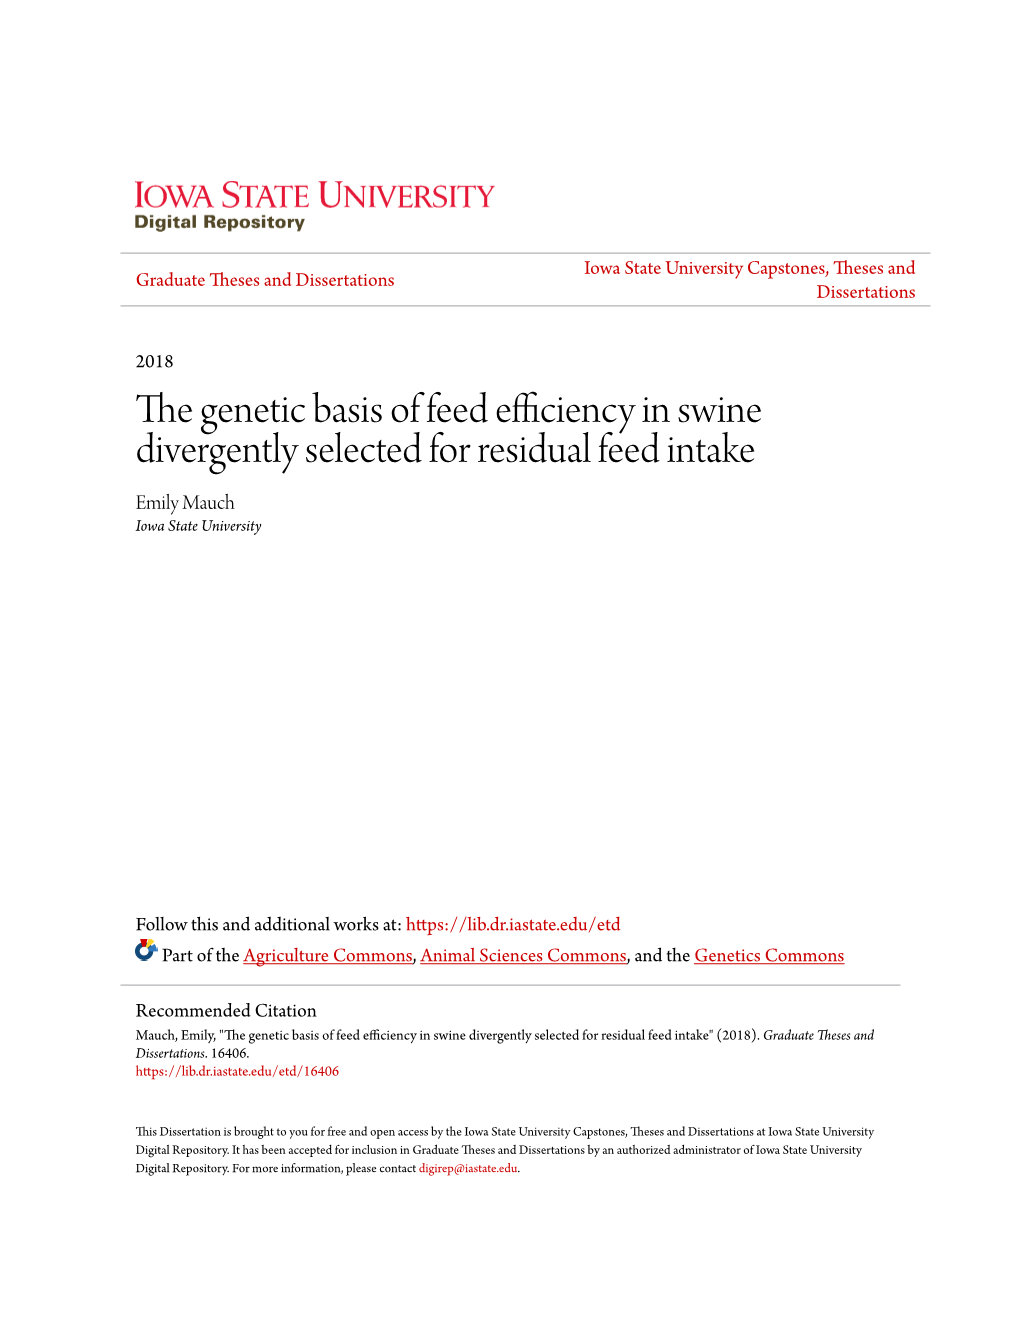 The Genetic Basis of Feed Efficiency in Swine Divergently Selected for Residual Feed Intake Emily Mauch Iowa State University